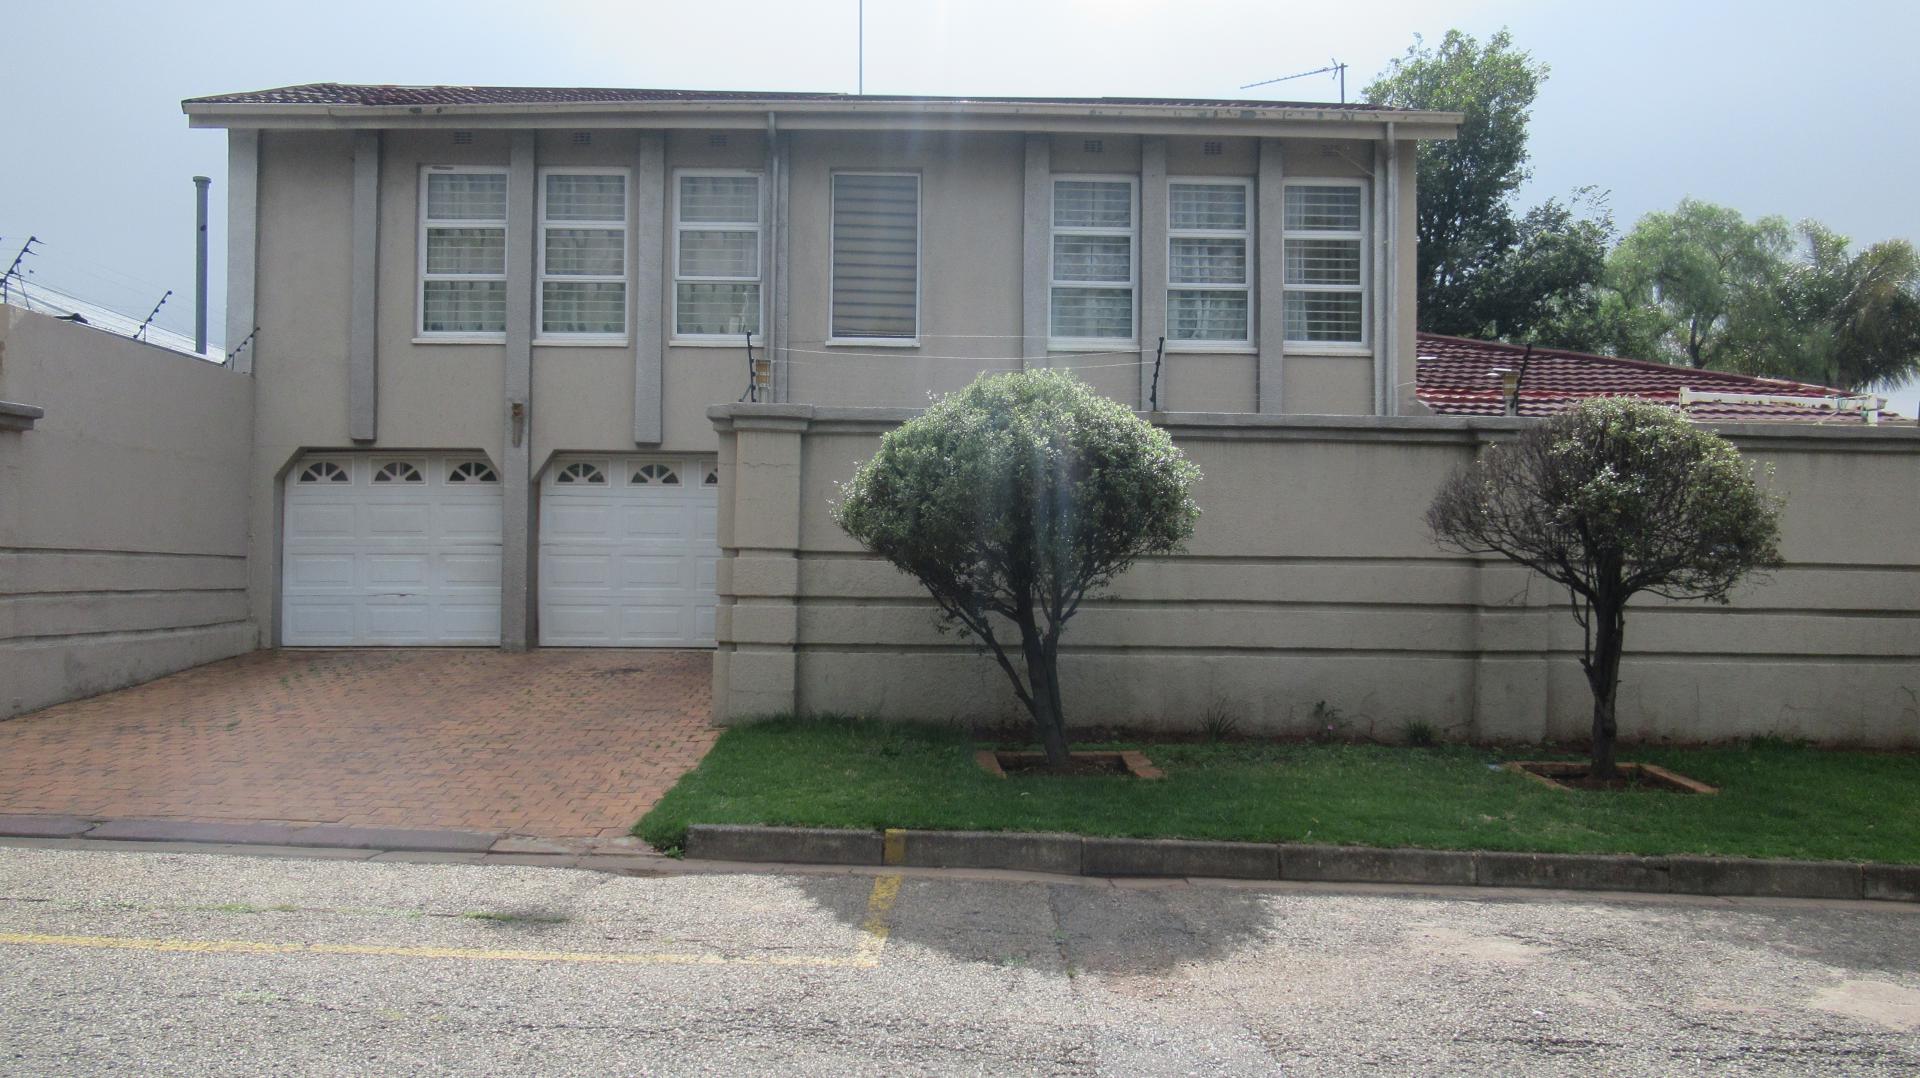 FNB Repossessed Eviction 3 Bedroom House for Sale in Homeste